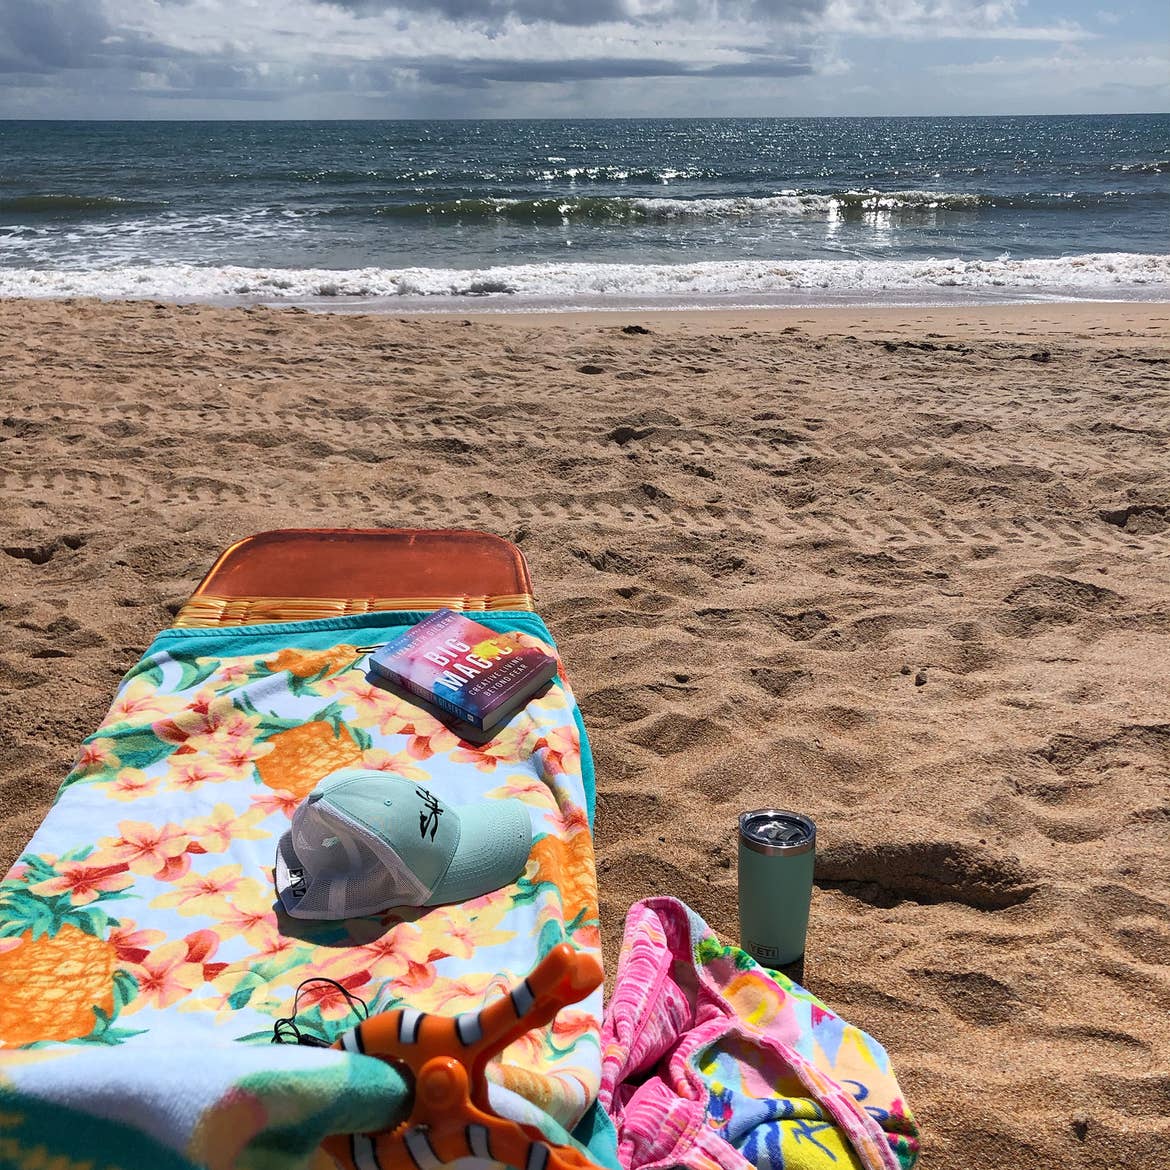 A beach chair with a baseball cap, towel, and a good book faces the ocean waves as they roll in.